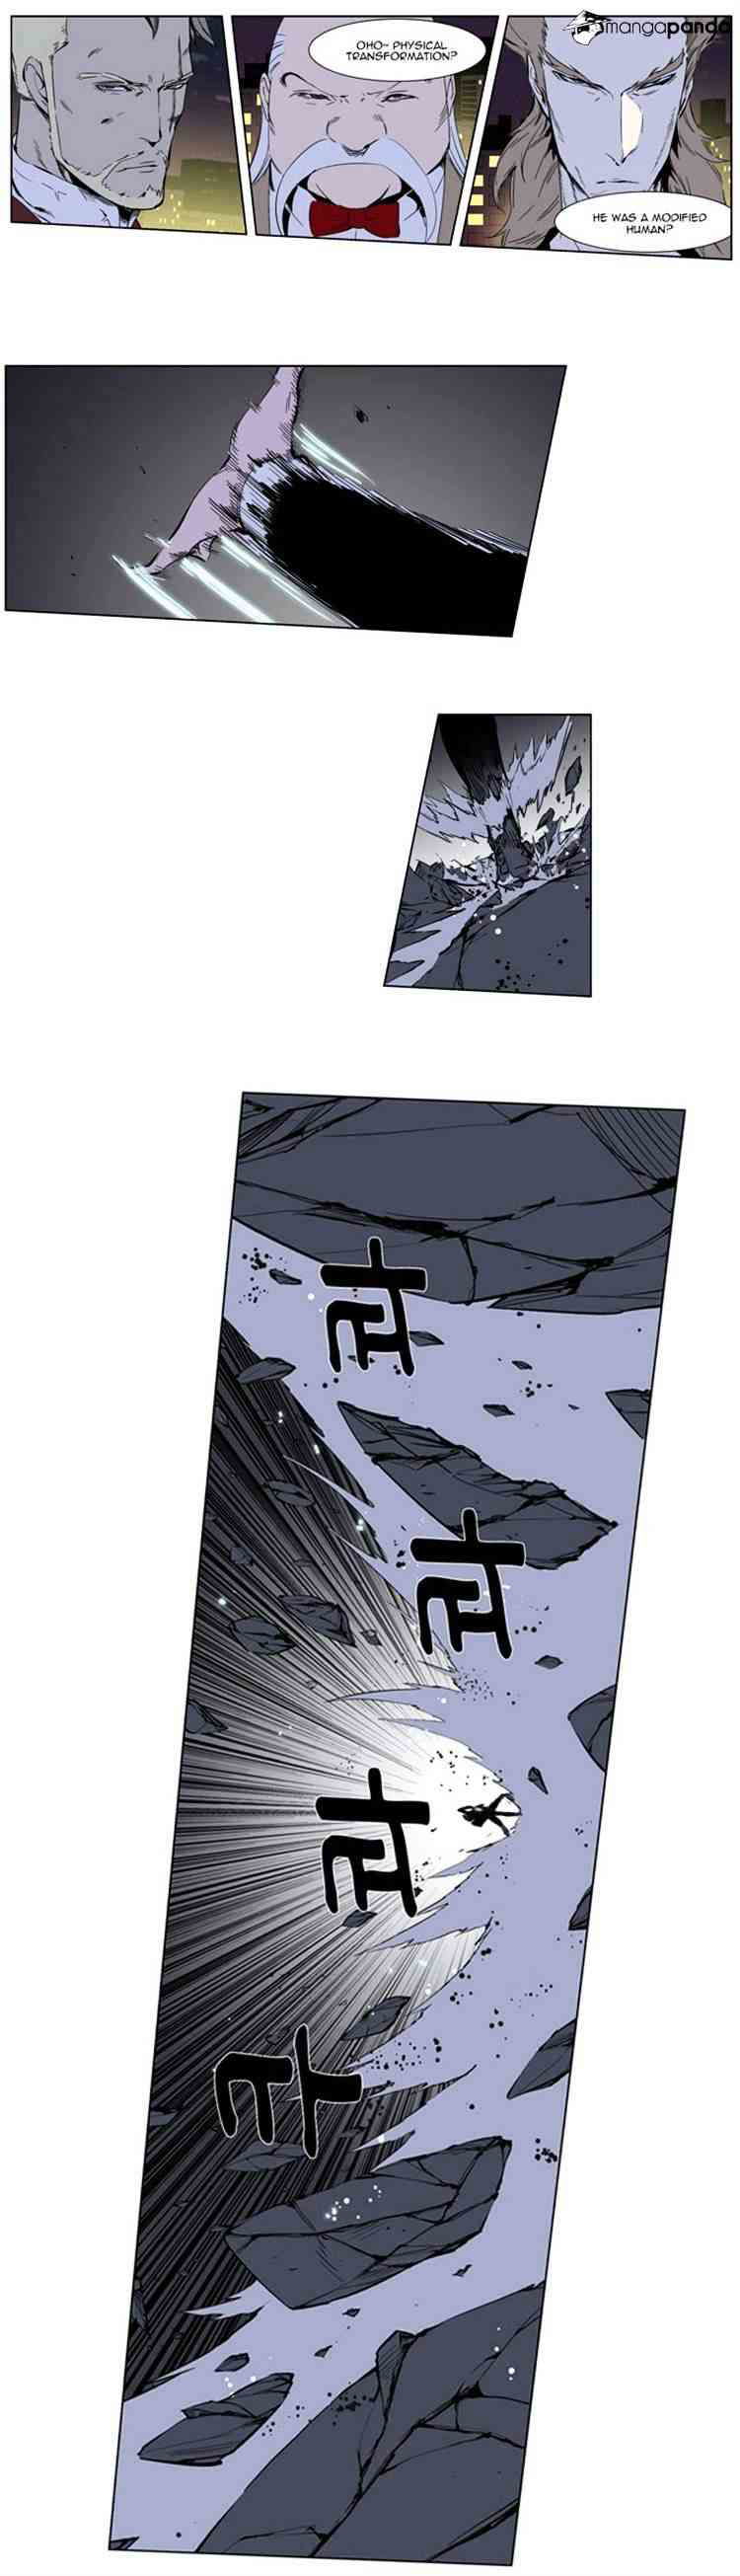 Noblesse Chapter 256 page 7